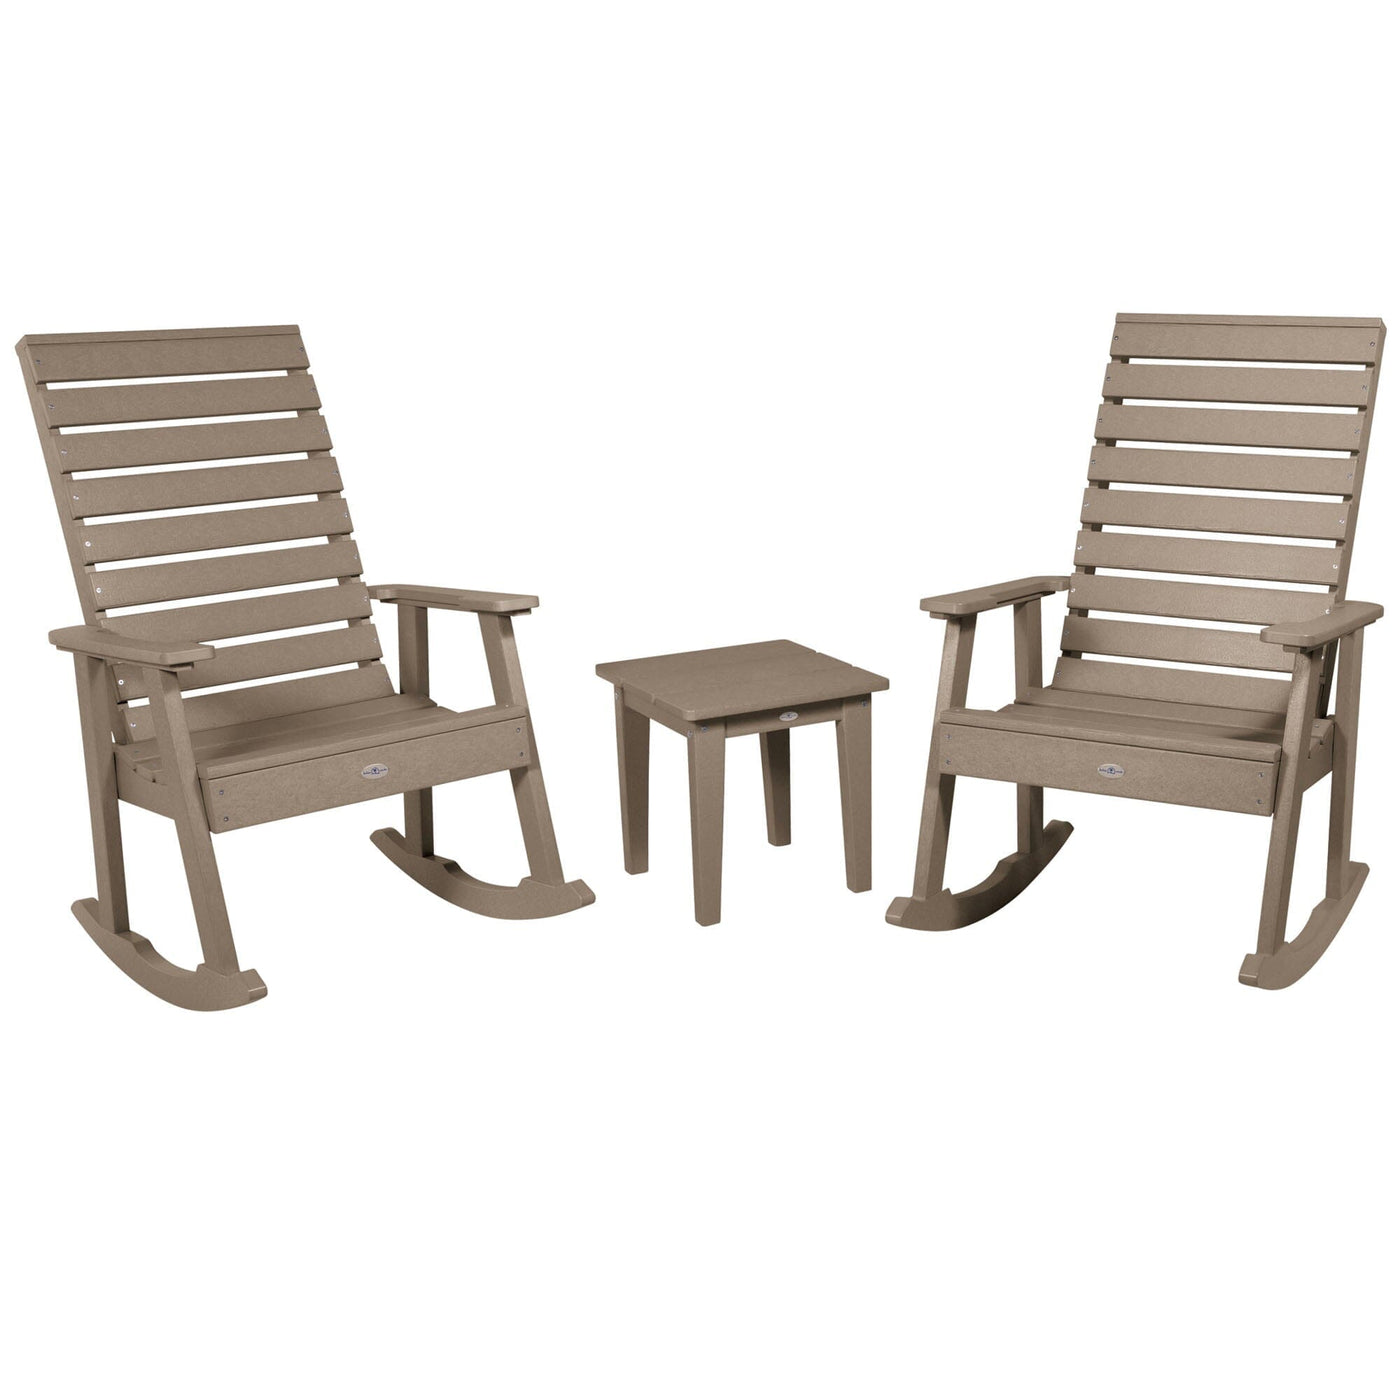 Riverside Rocking Chair and Side Table 3pc Set Kitted Set Bahia Verde Outdoors Cabana Tan 